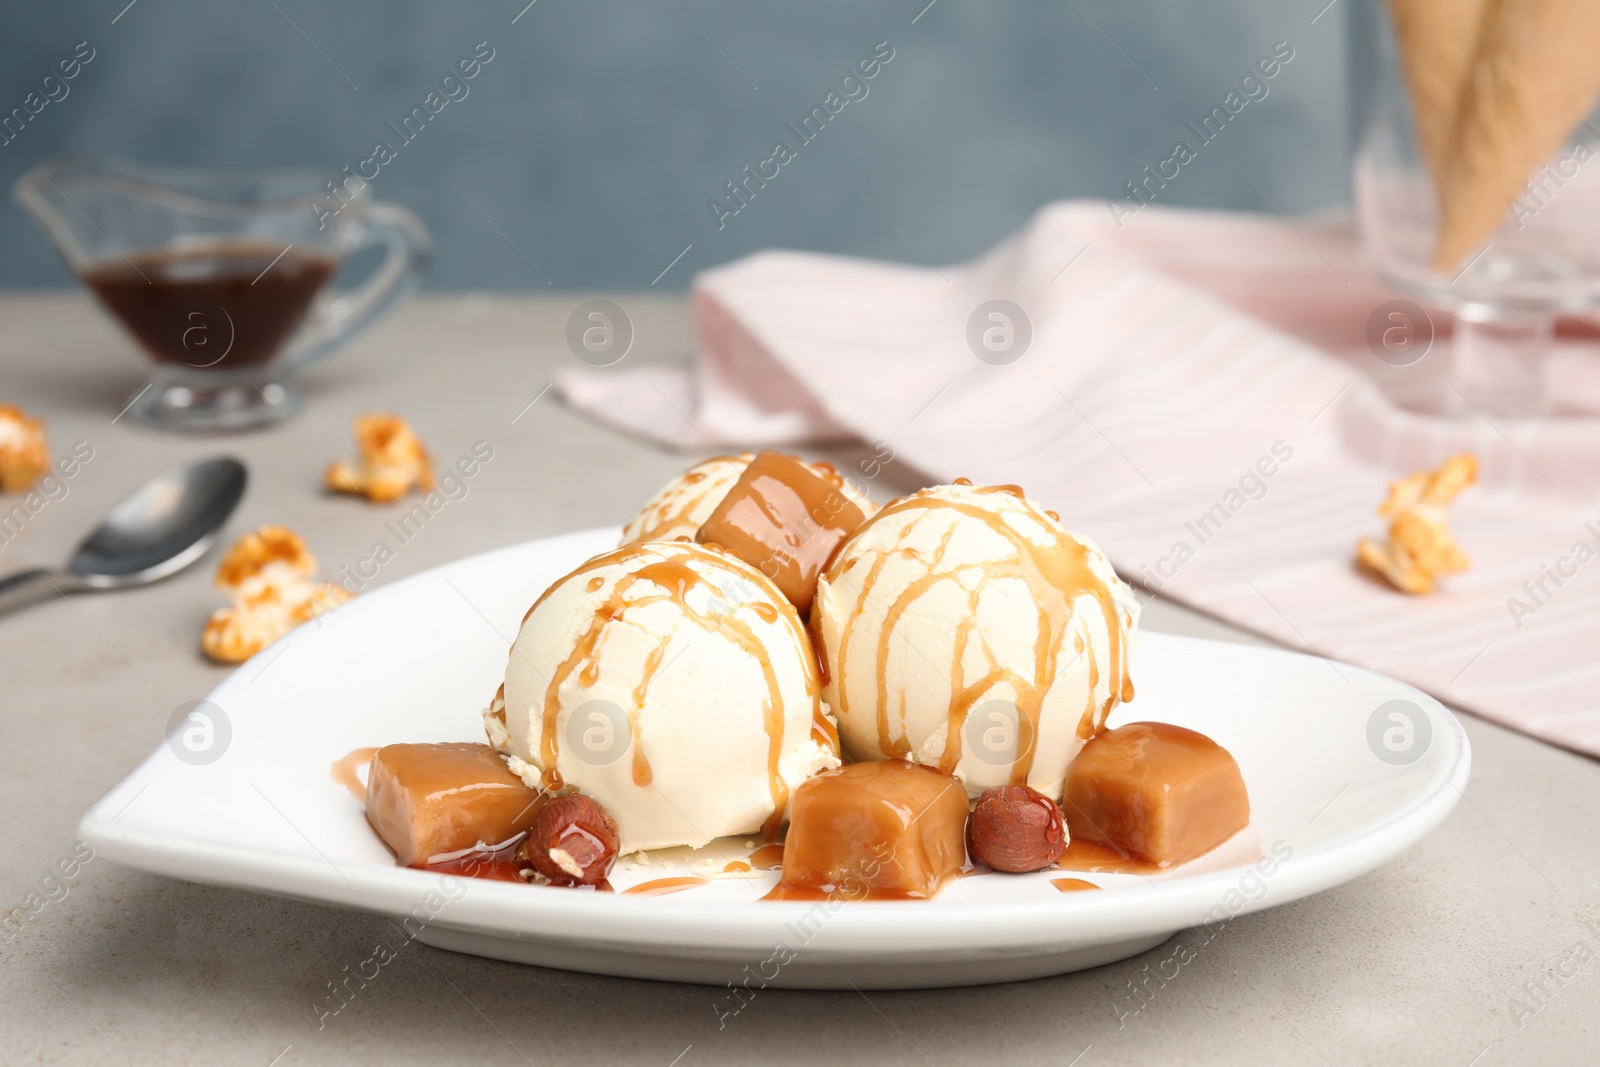 Photo of Delicious ice cream served with caramel and hazelnuts on table